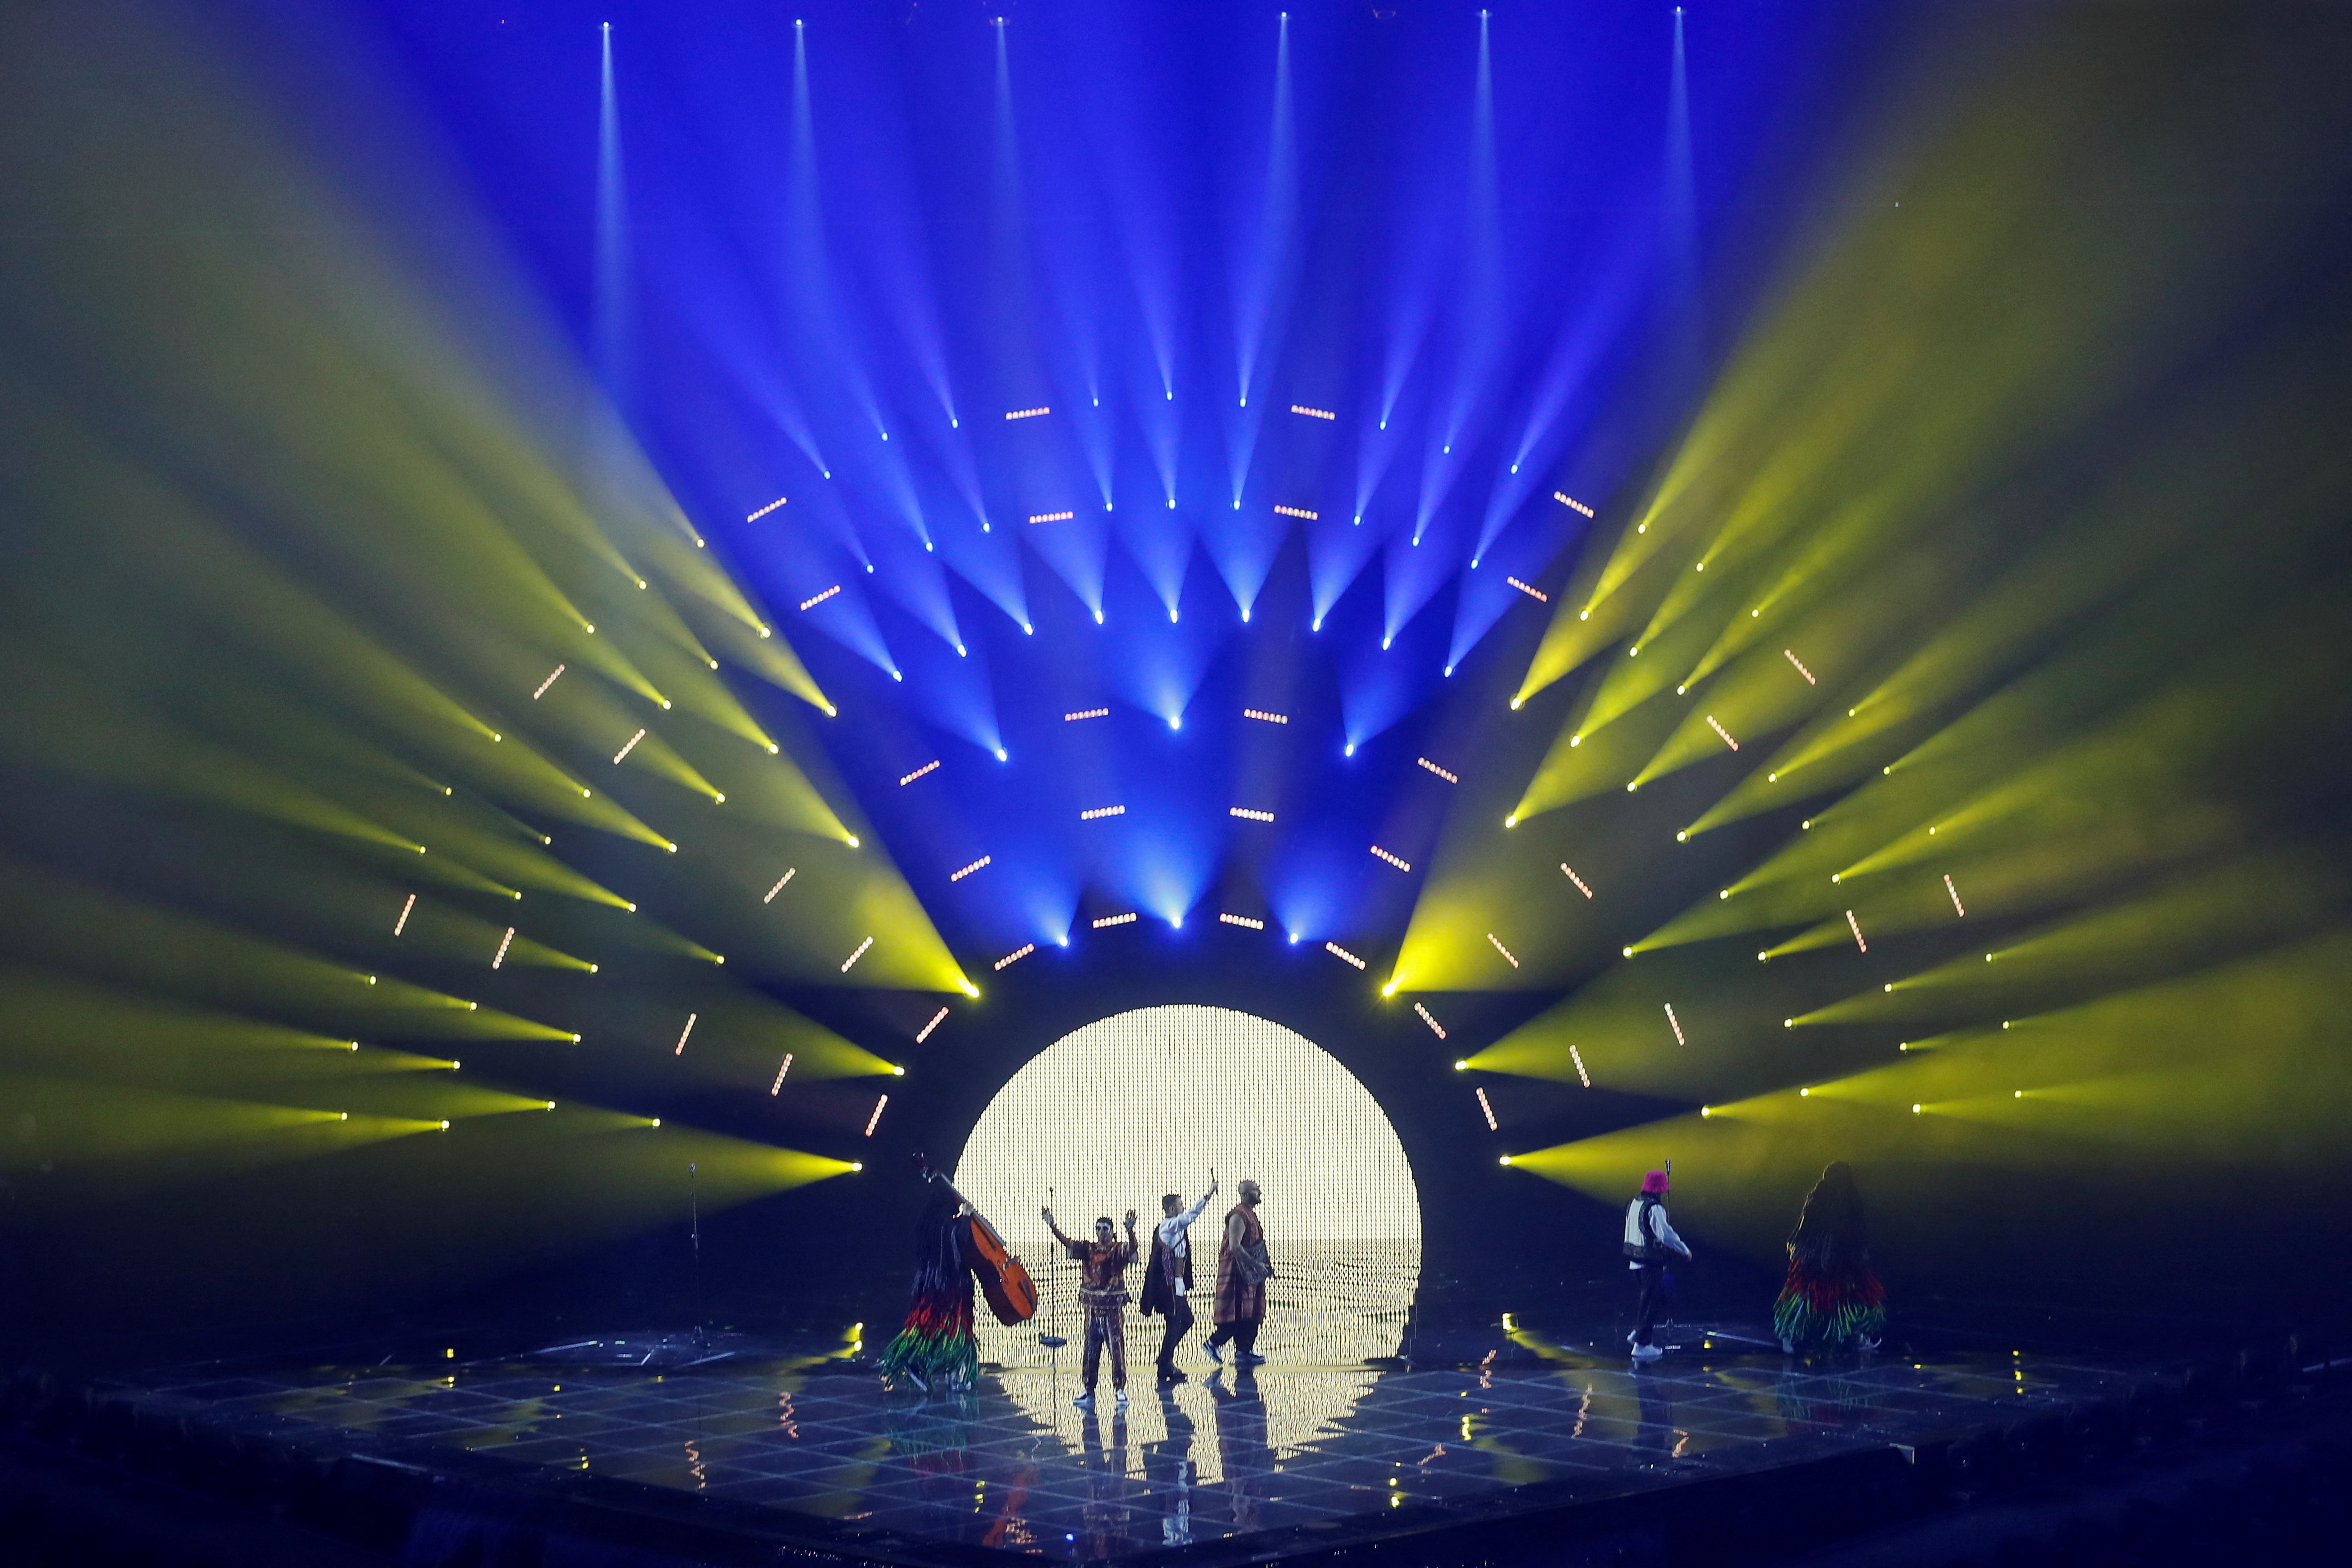 2022 Eurovision Song Contest first semi-final in Turin